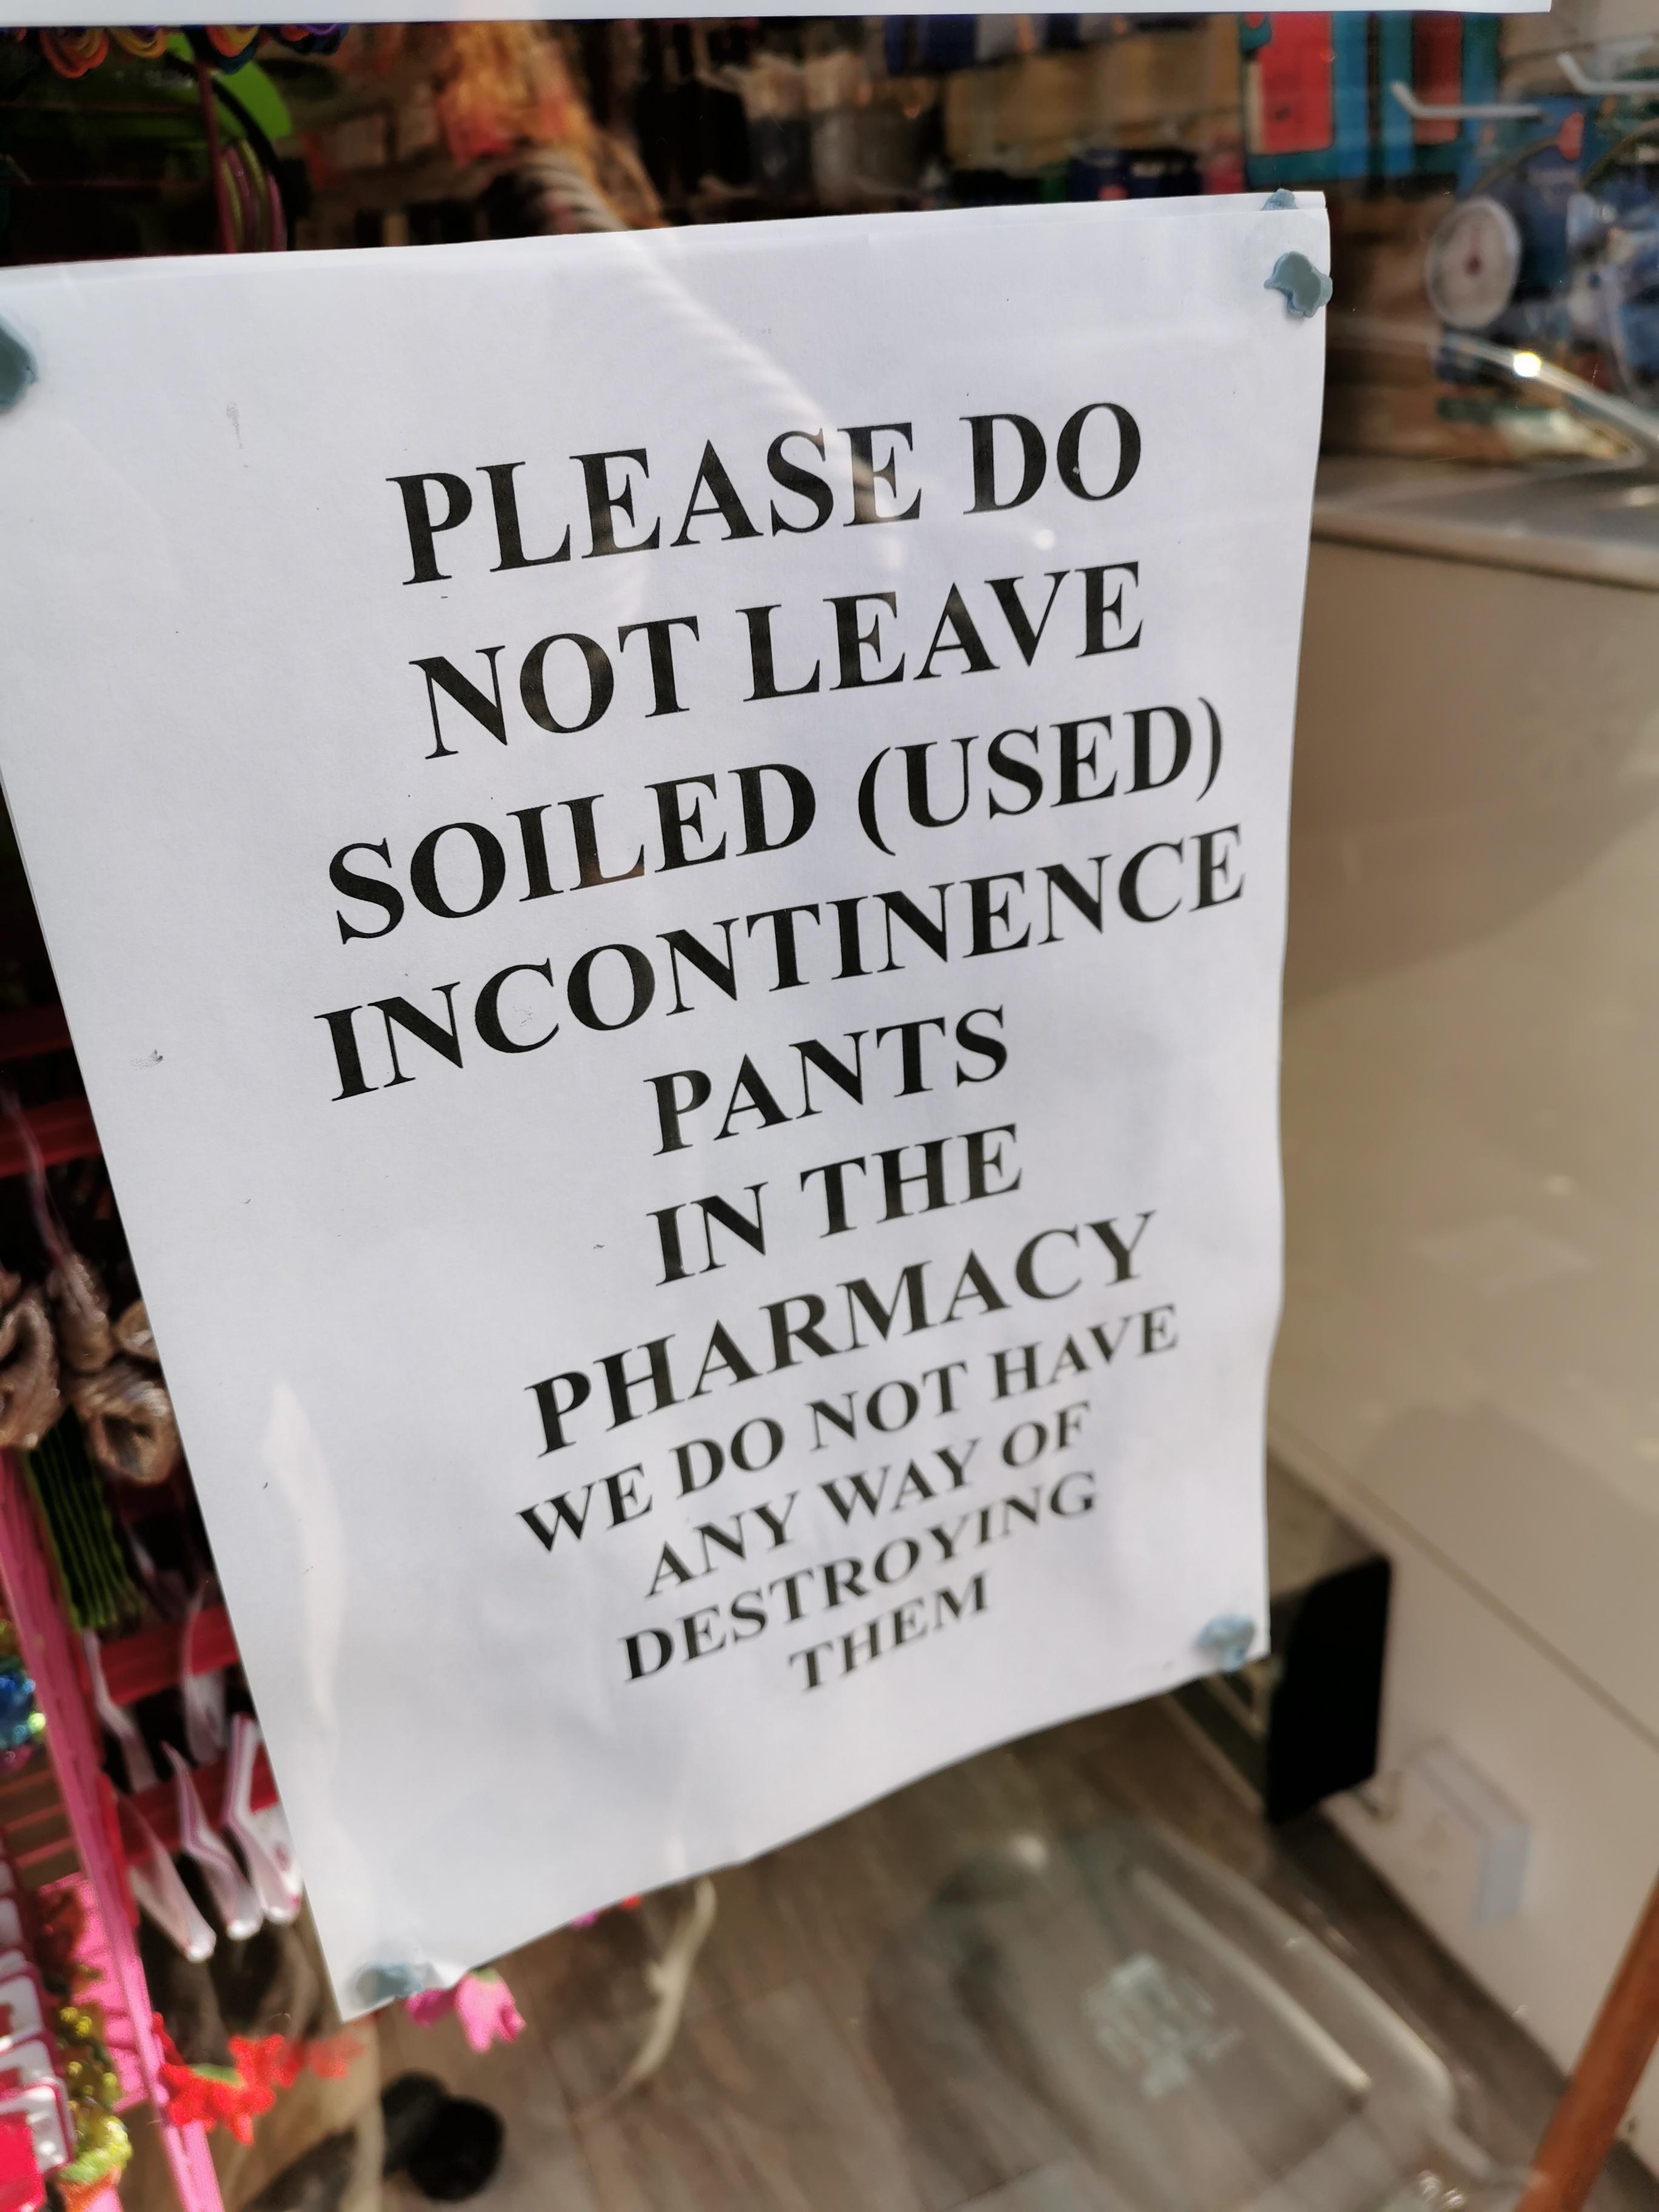 business contract - Please Do Not Leave Soiled Used Incontinence Pants In The Pharmacy We Do Not Have Any Way Of Destroying Them